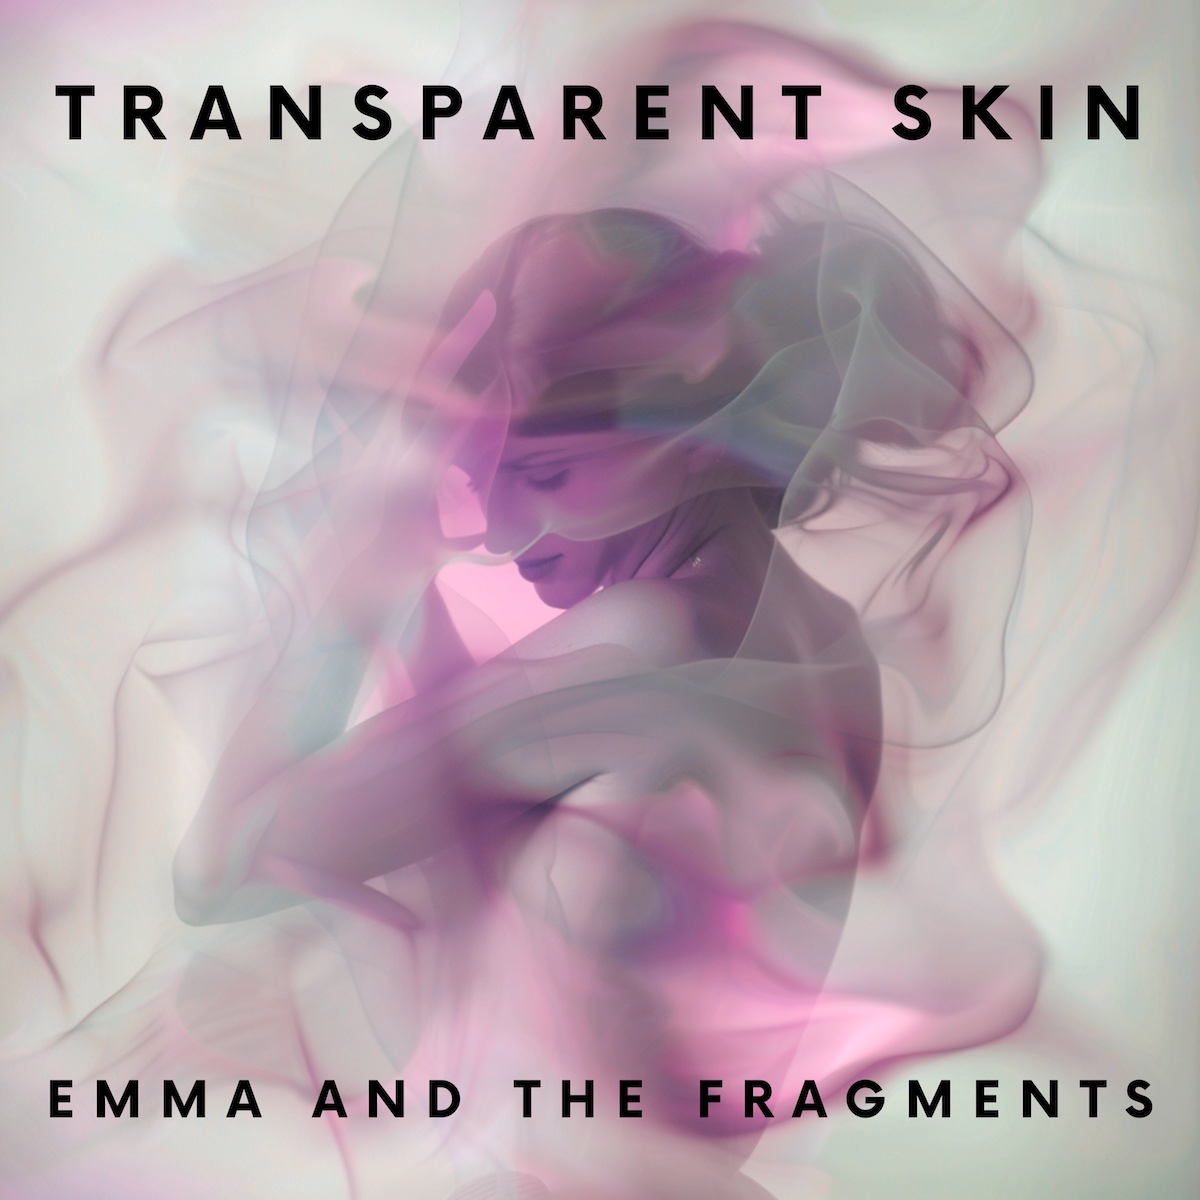 LISTEN: “Transparent Skin” by Emma and the Fragments